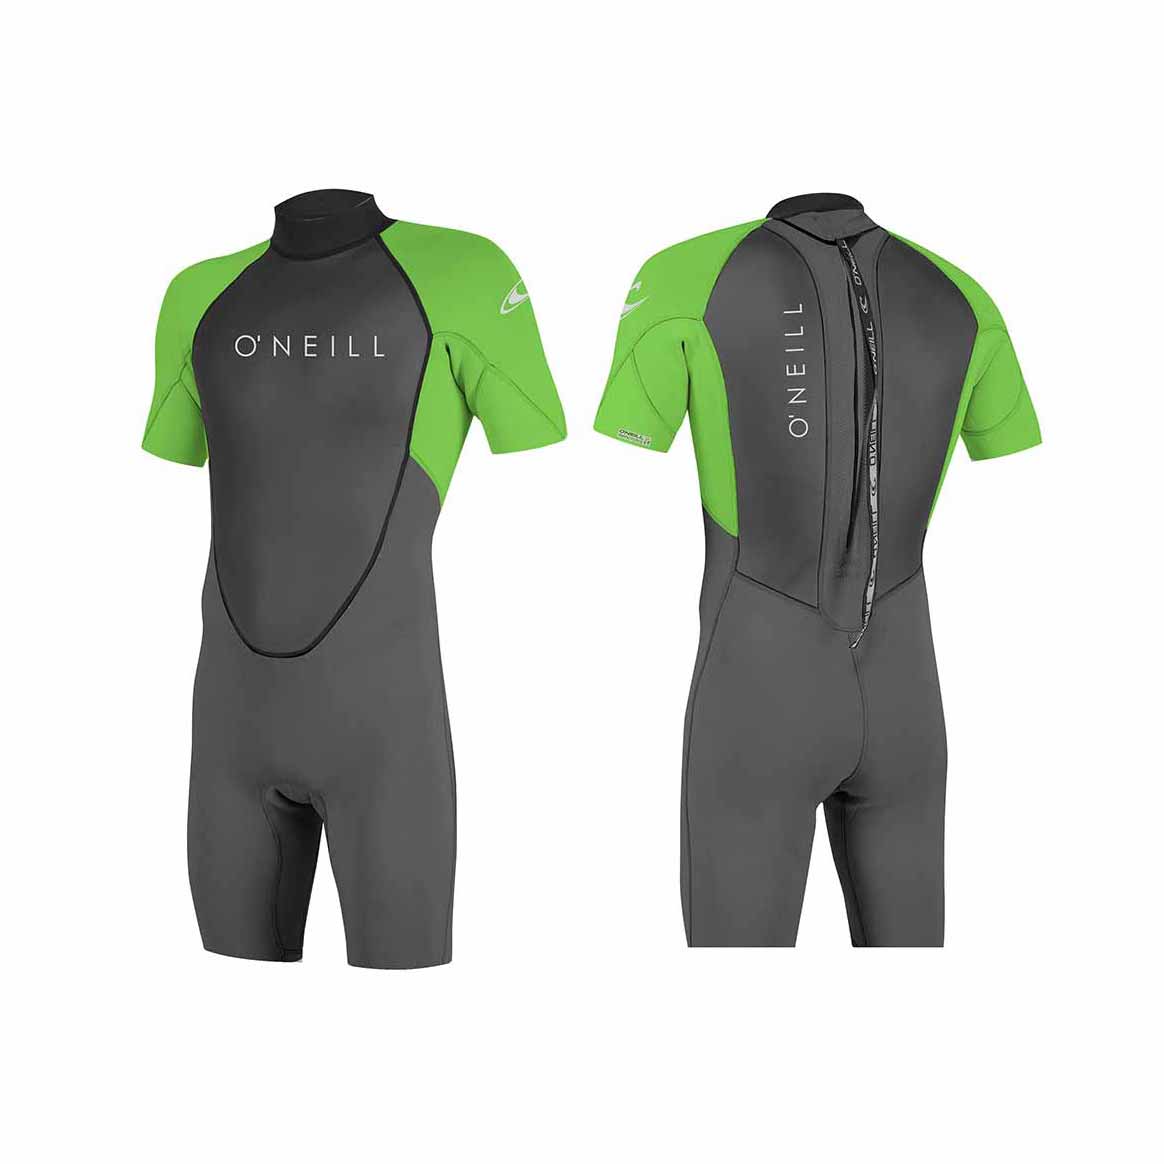 O'Neill Reactor II BZ Spring 2mm wetsuit – Graph / Dayglo AU1